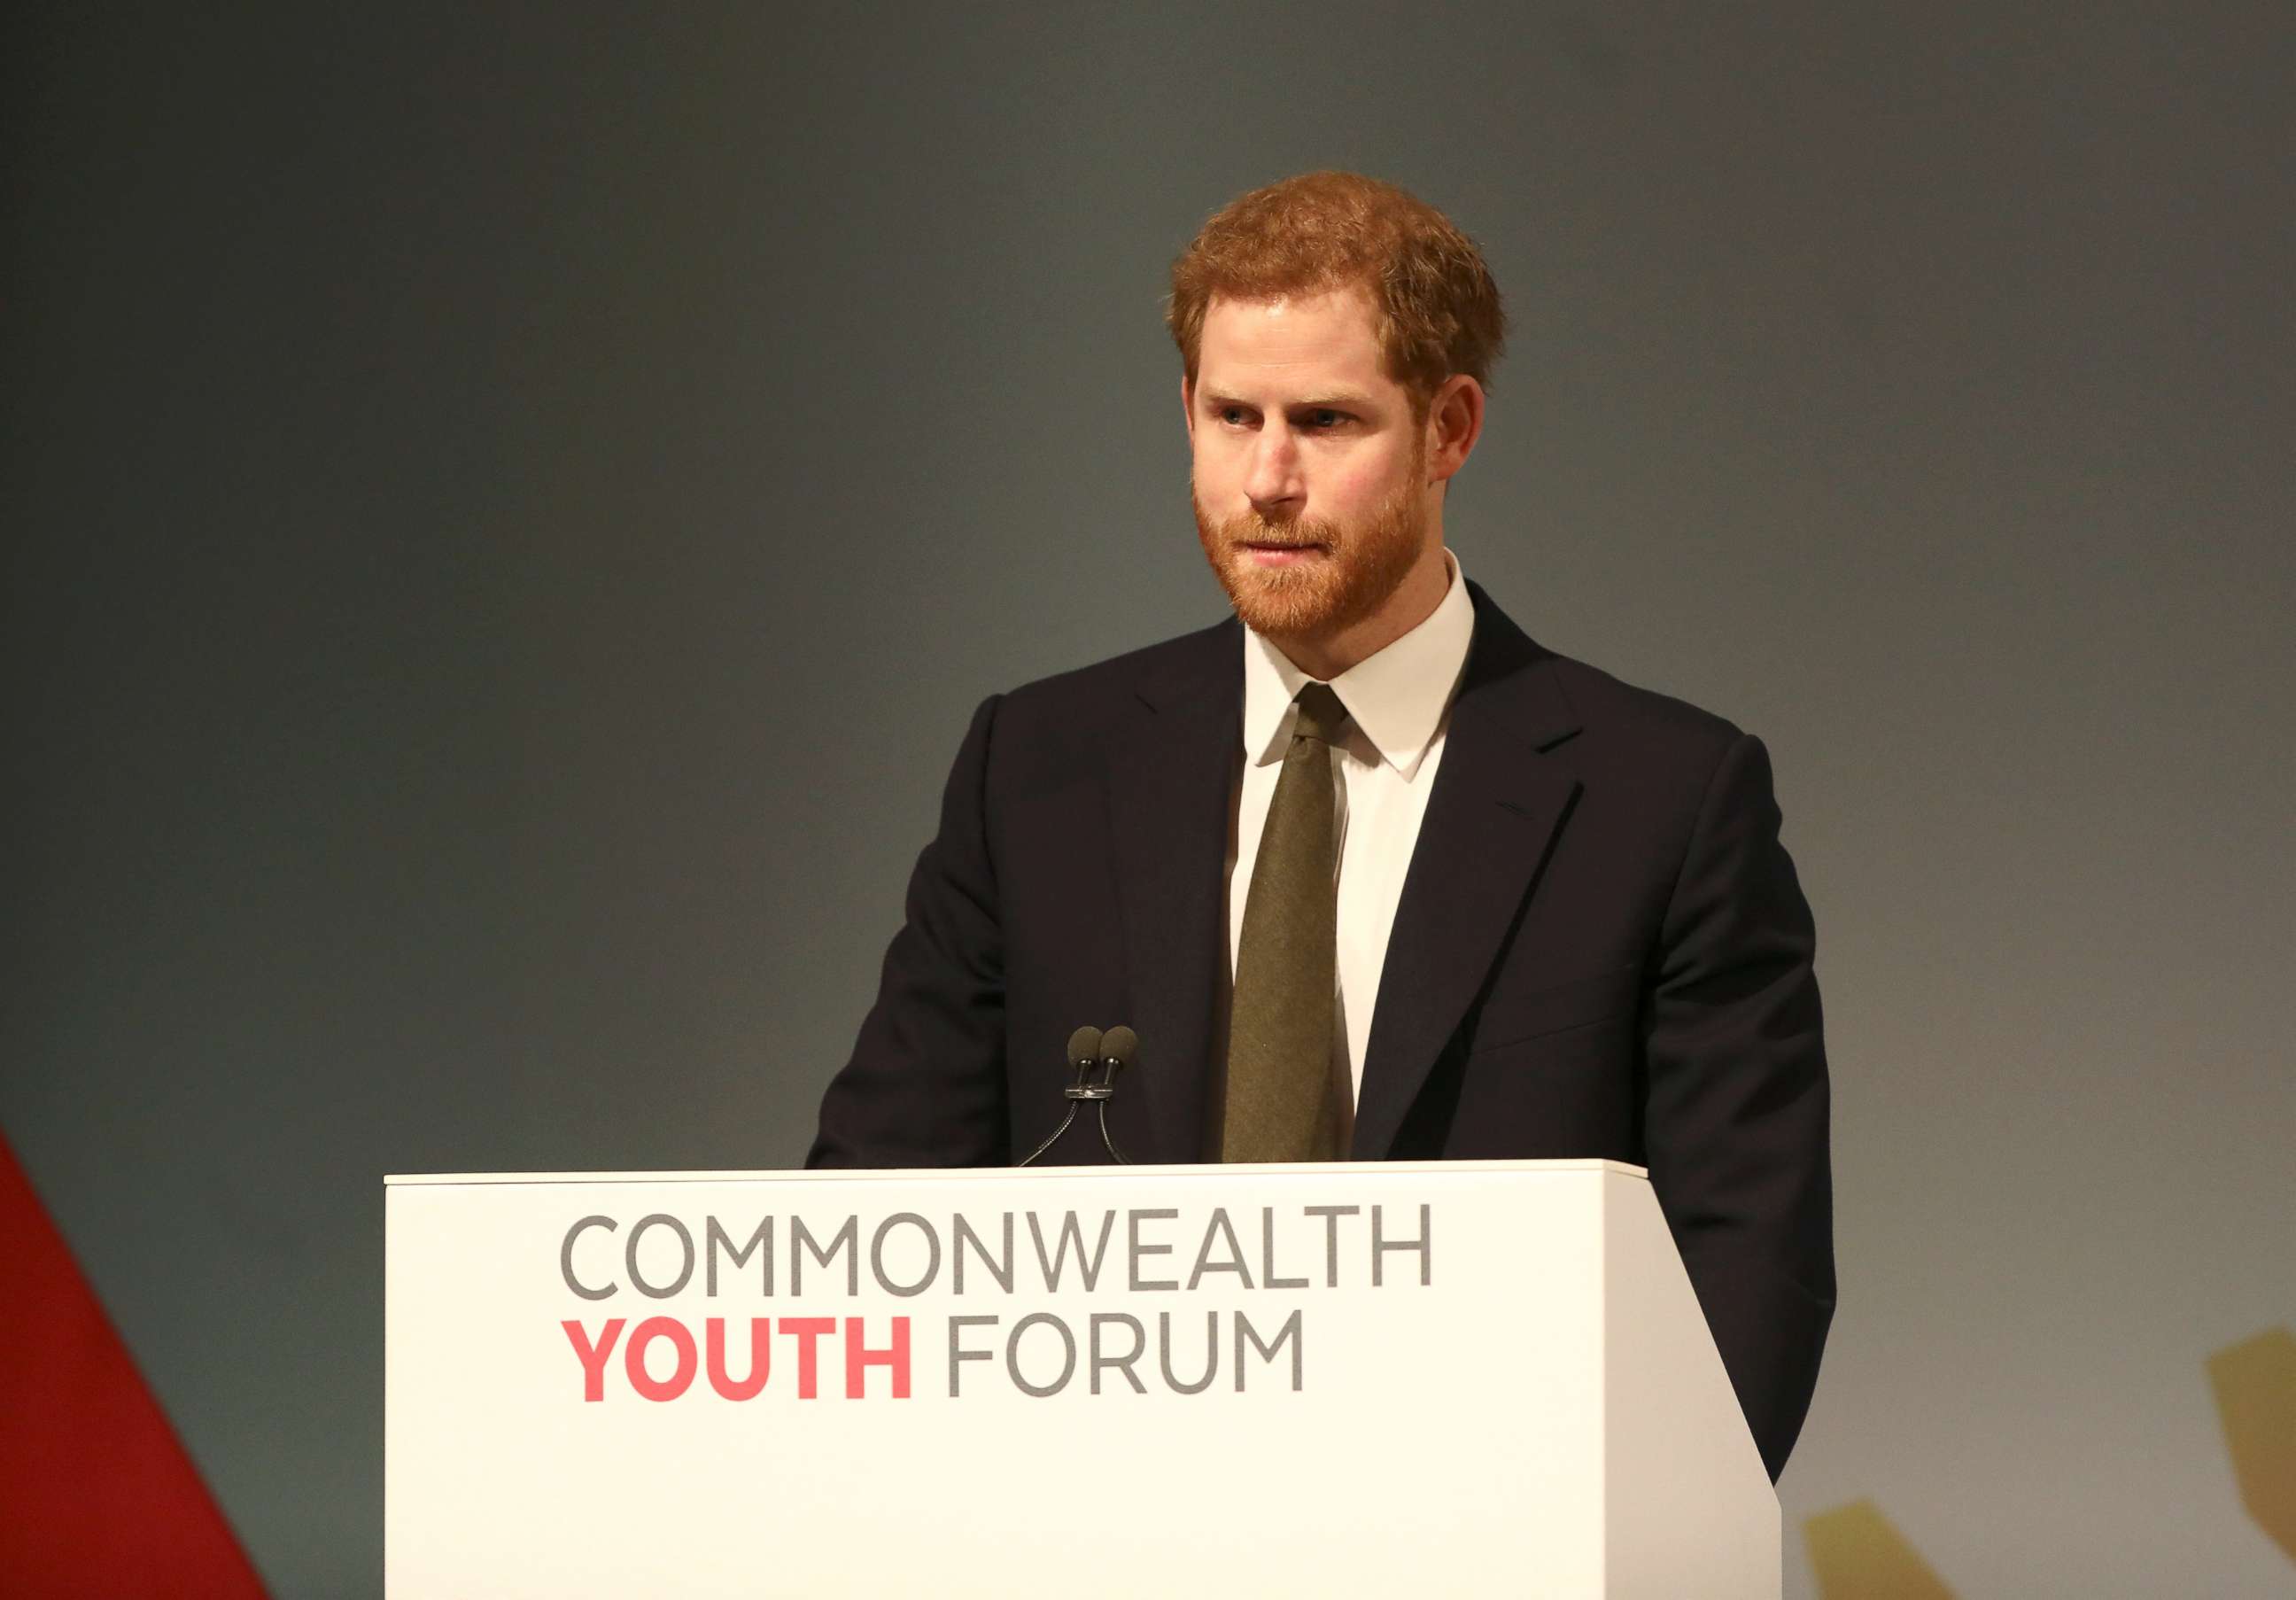 PHOTO: Britain's Prince Harry attends a Youth Forum on the sidelines of the Commonwealth Heads of Government Meeting (CHOGM) in London, April 16, 2018.